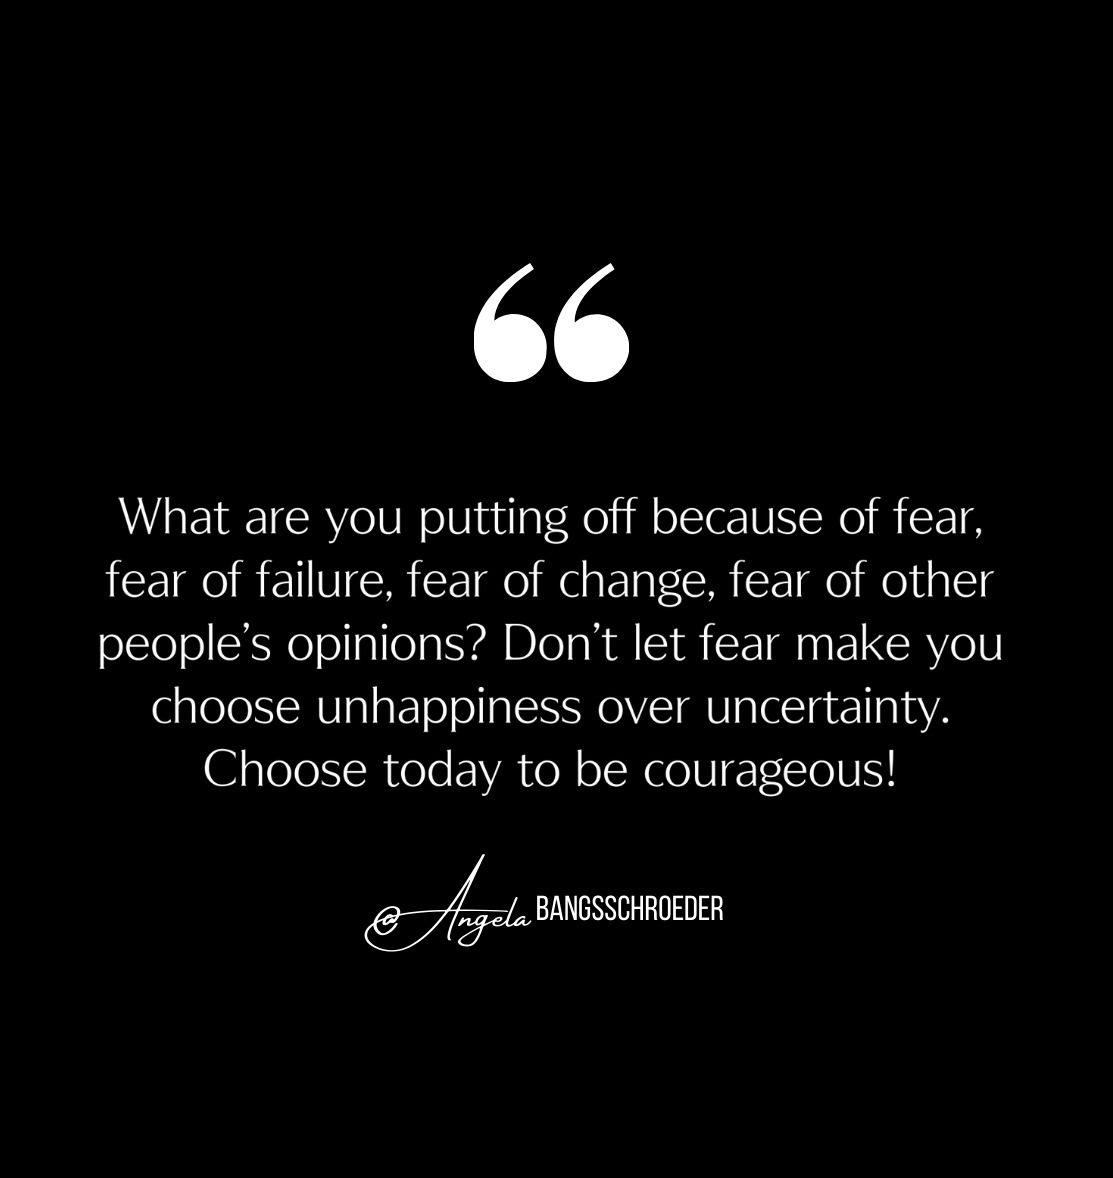 Quote by Angela Schroeder - The Courageous Mind